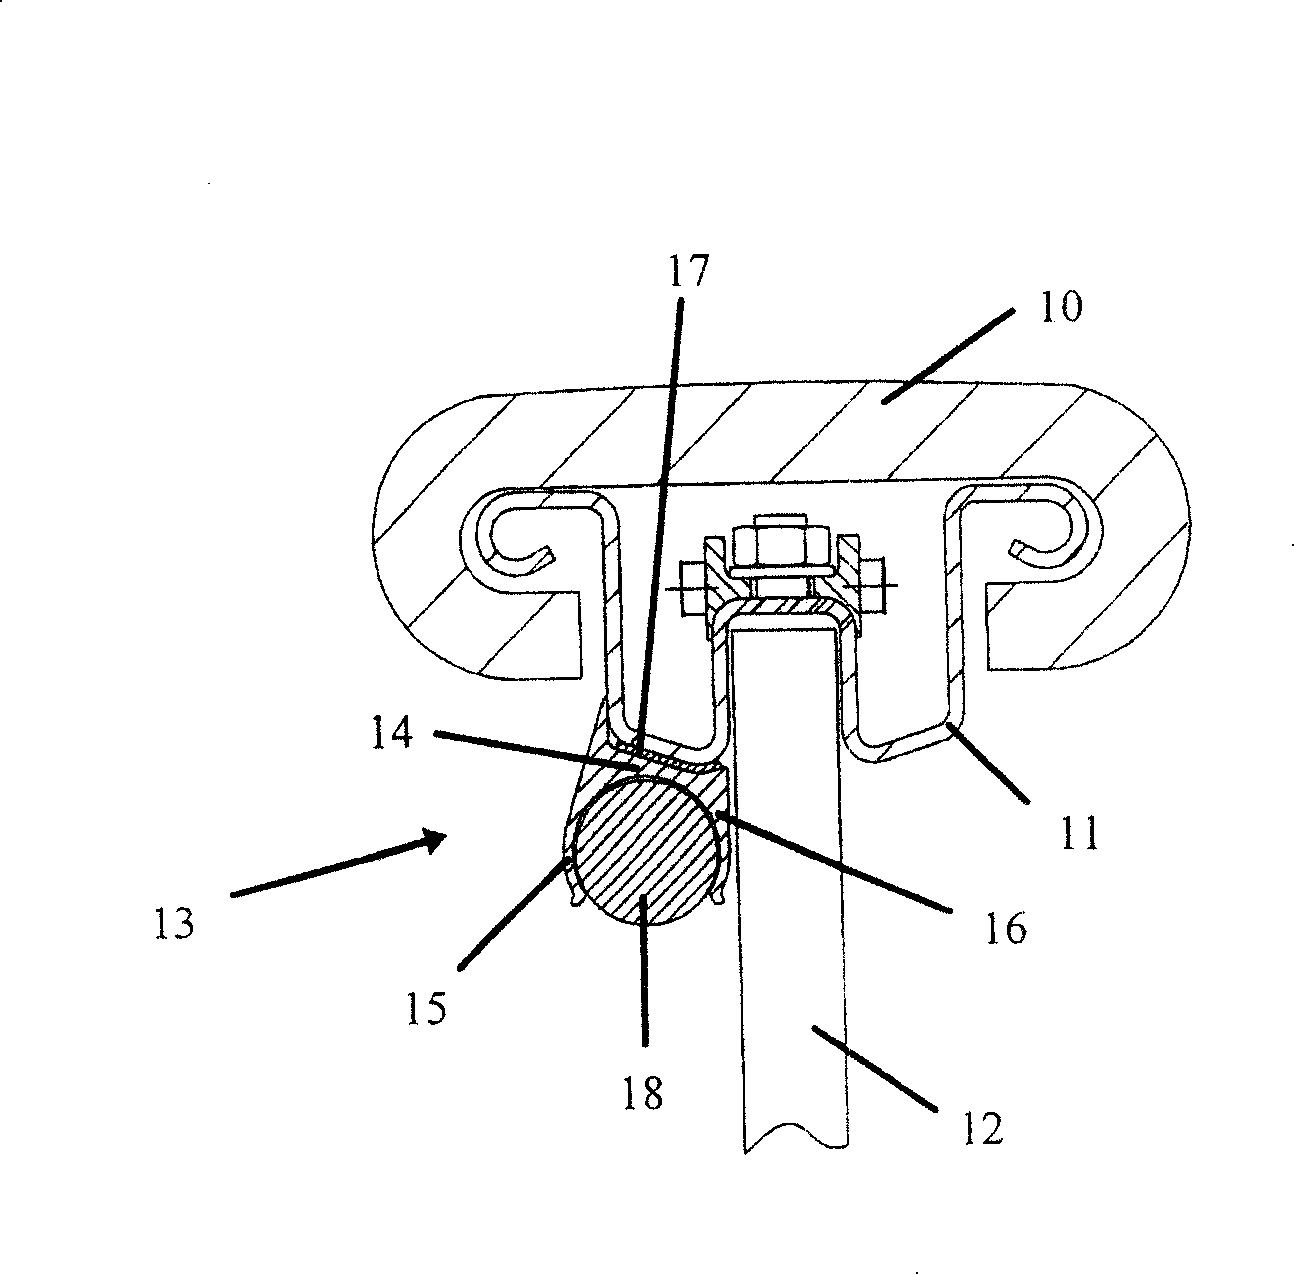 Lighting system for person transmission facility